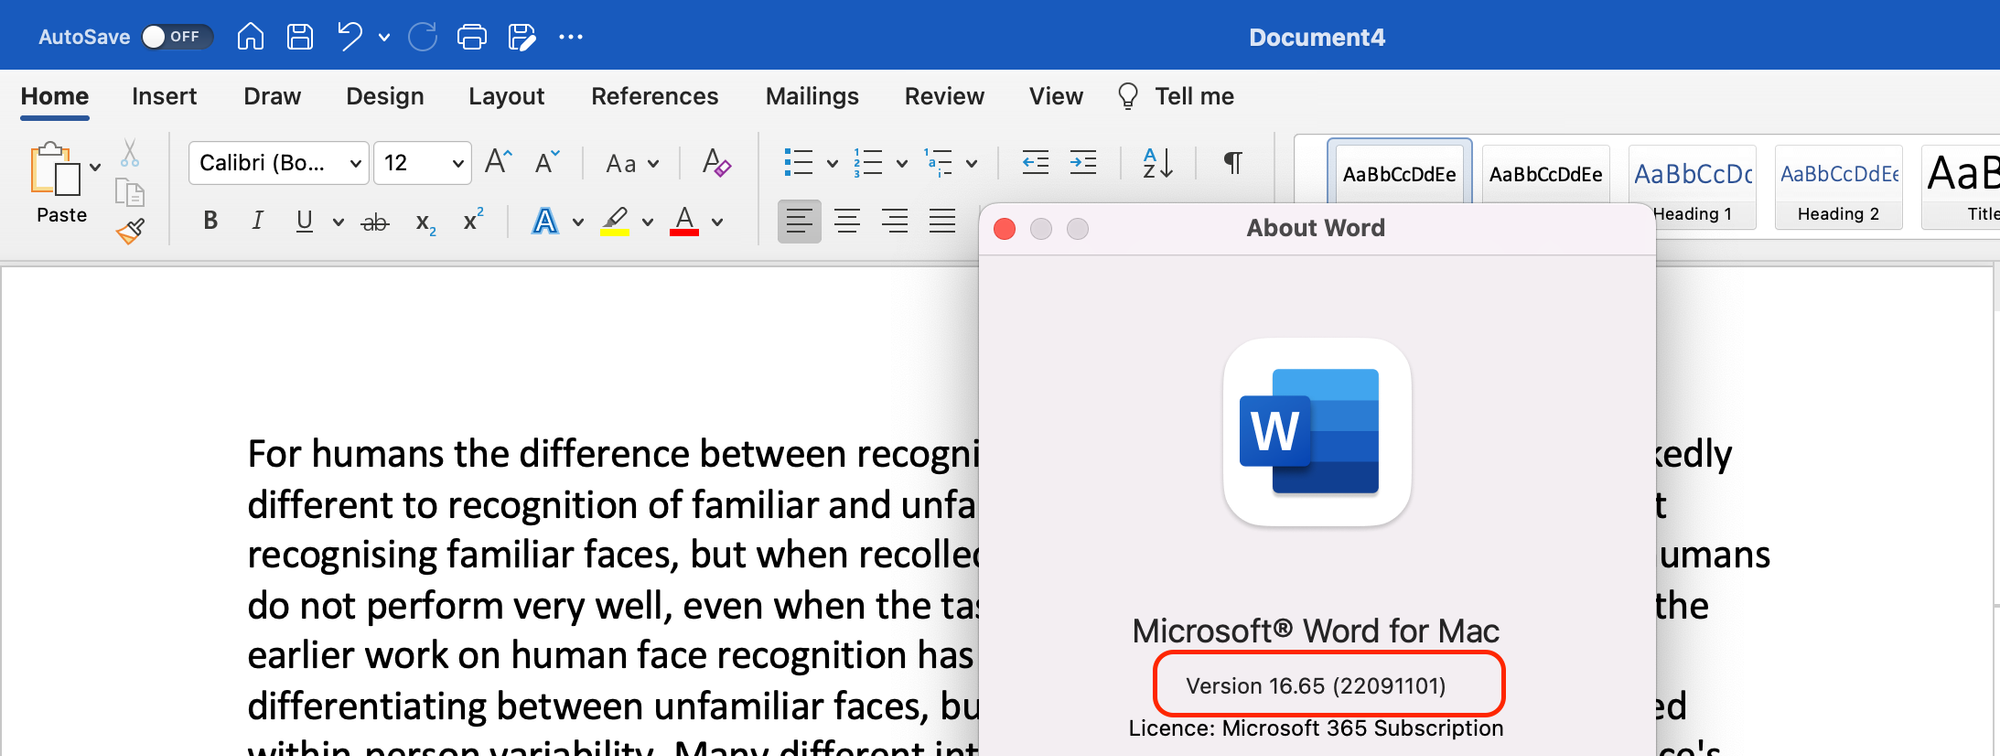 After clicking the About Microsoft Word Menu, we can see our version